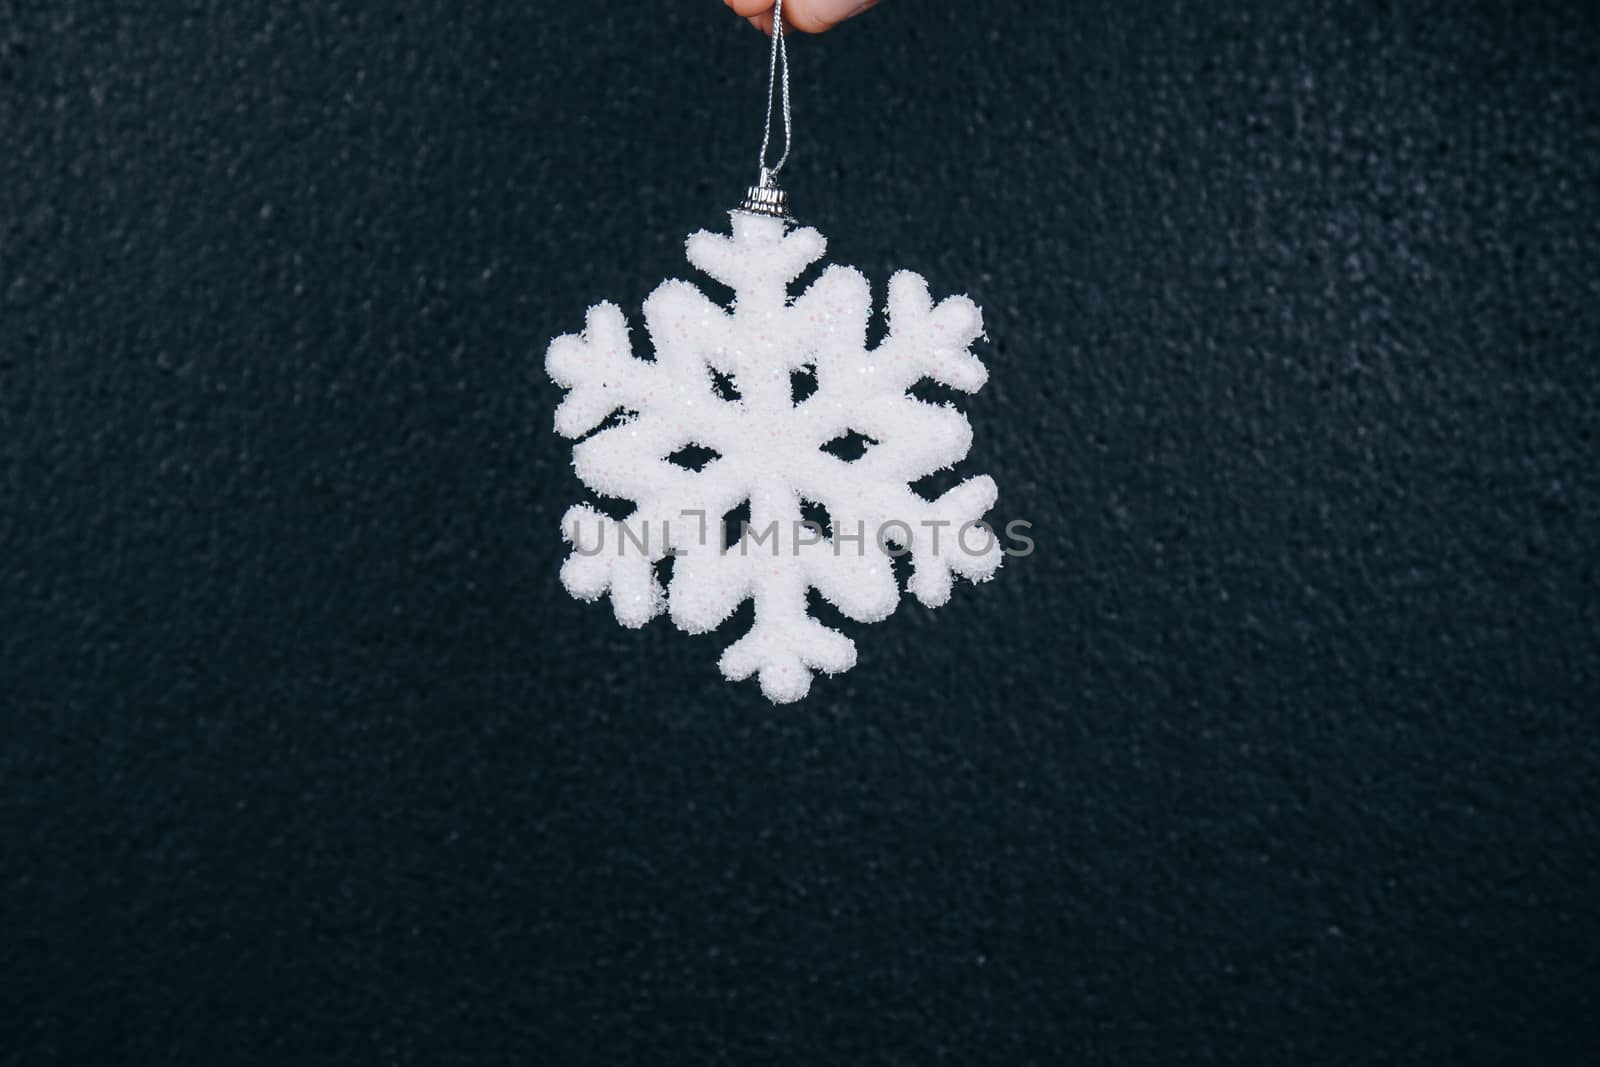 woman hand holding hanging snowflake toy for christmas decoration isolated on black background. new year gift card. handmade by yulaphotographer